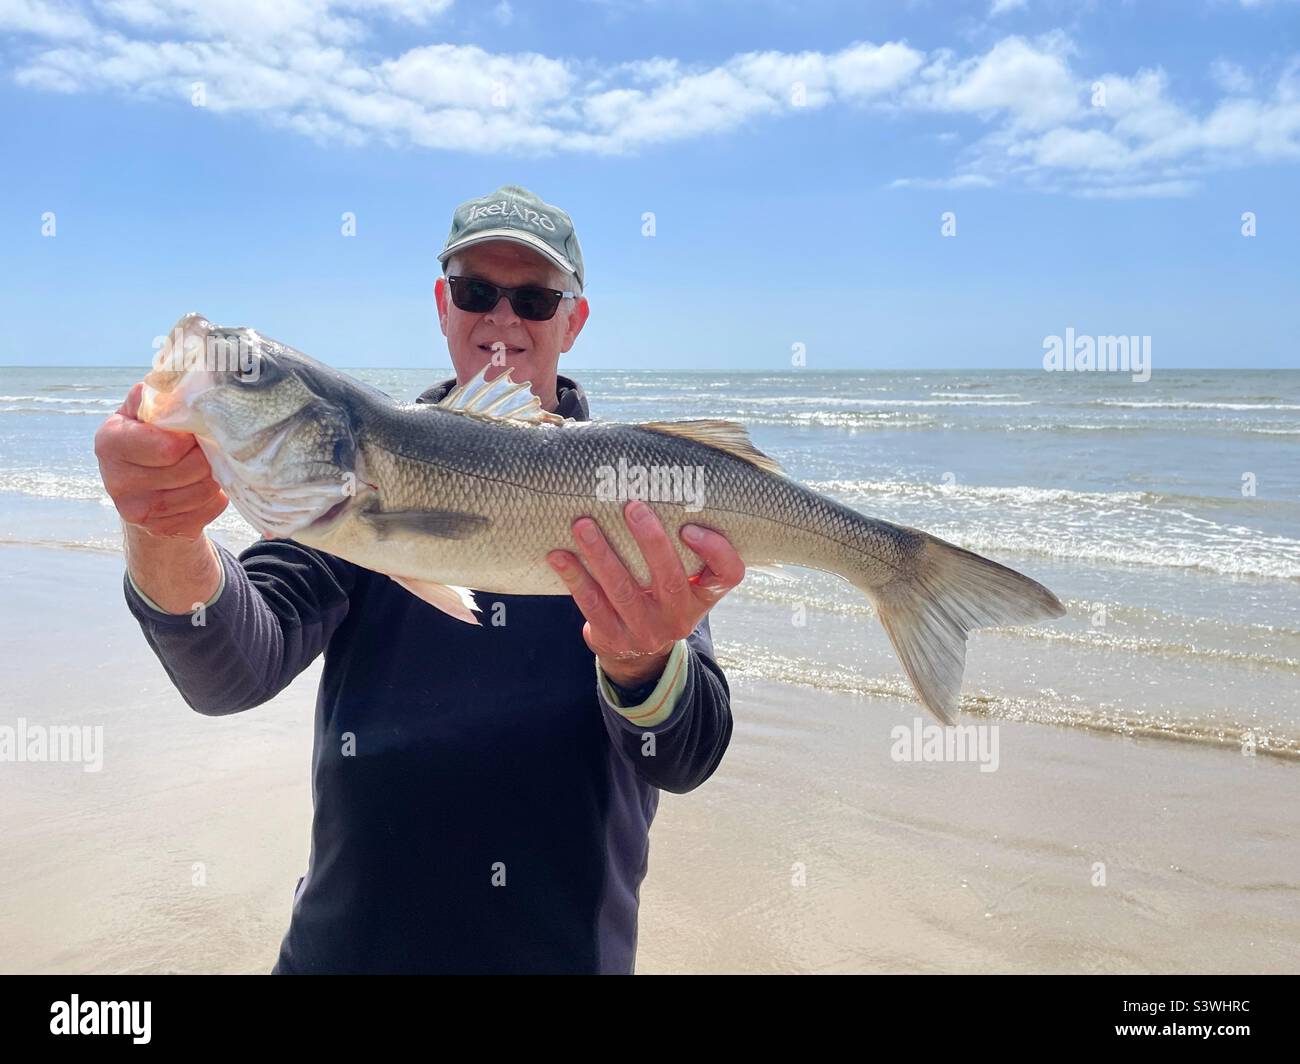 Angler holding a freshly caught Bass of about 5lbs from the Welsh coast in May. Stock Photo